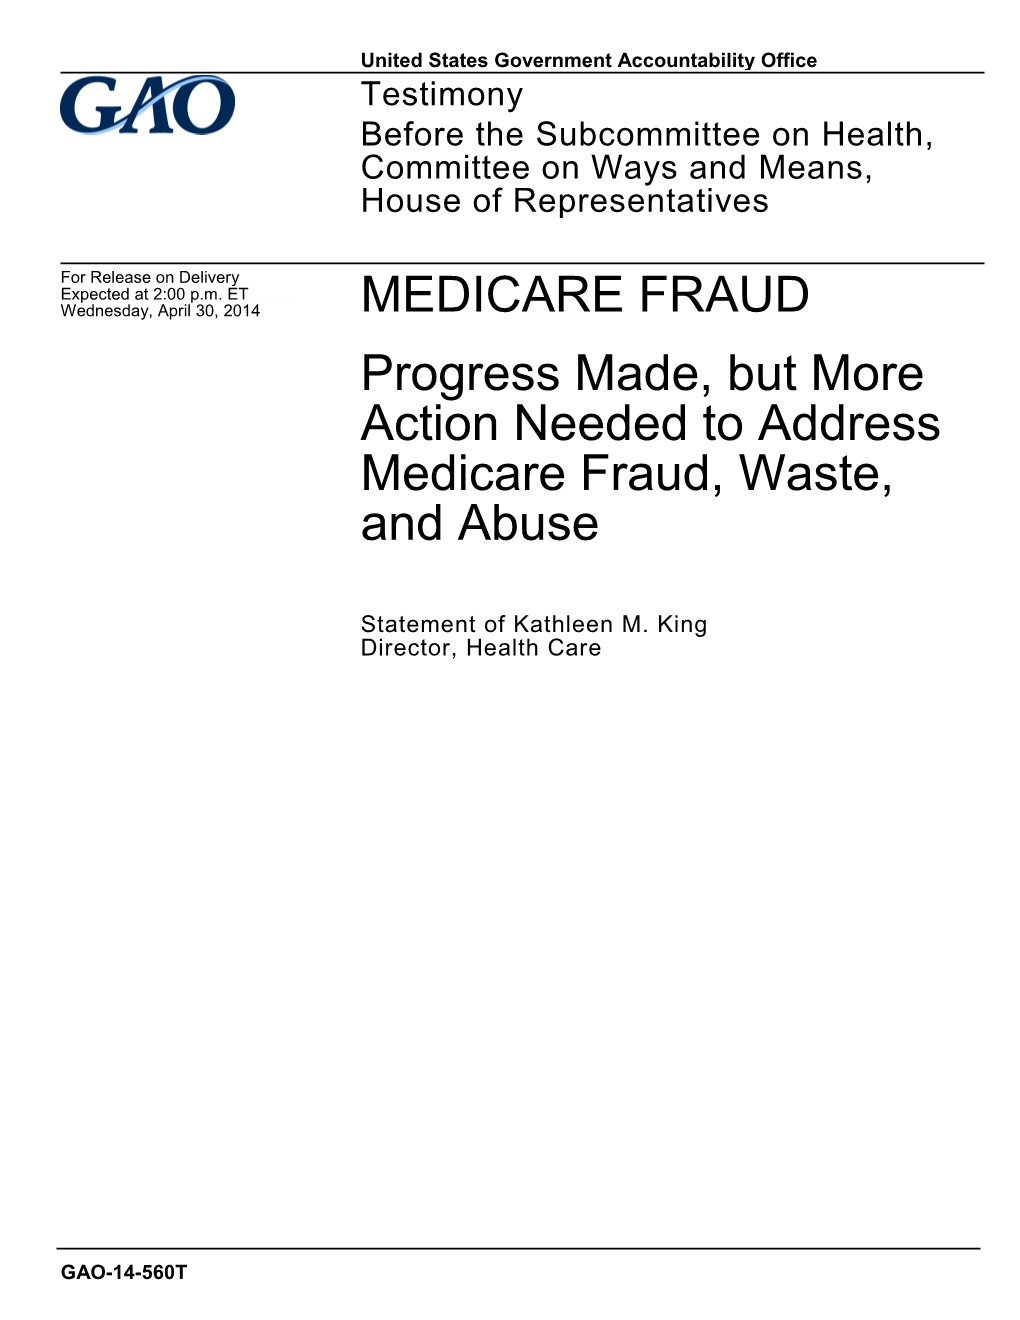 GAO-14-560T, MEDICARE FRAUD: Progress Made, but More Action